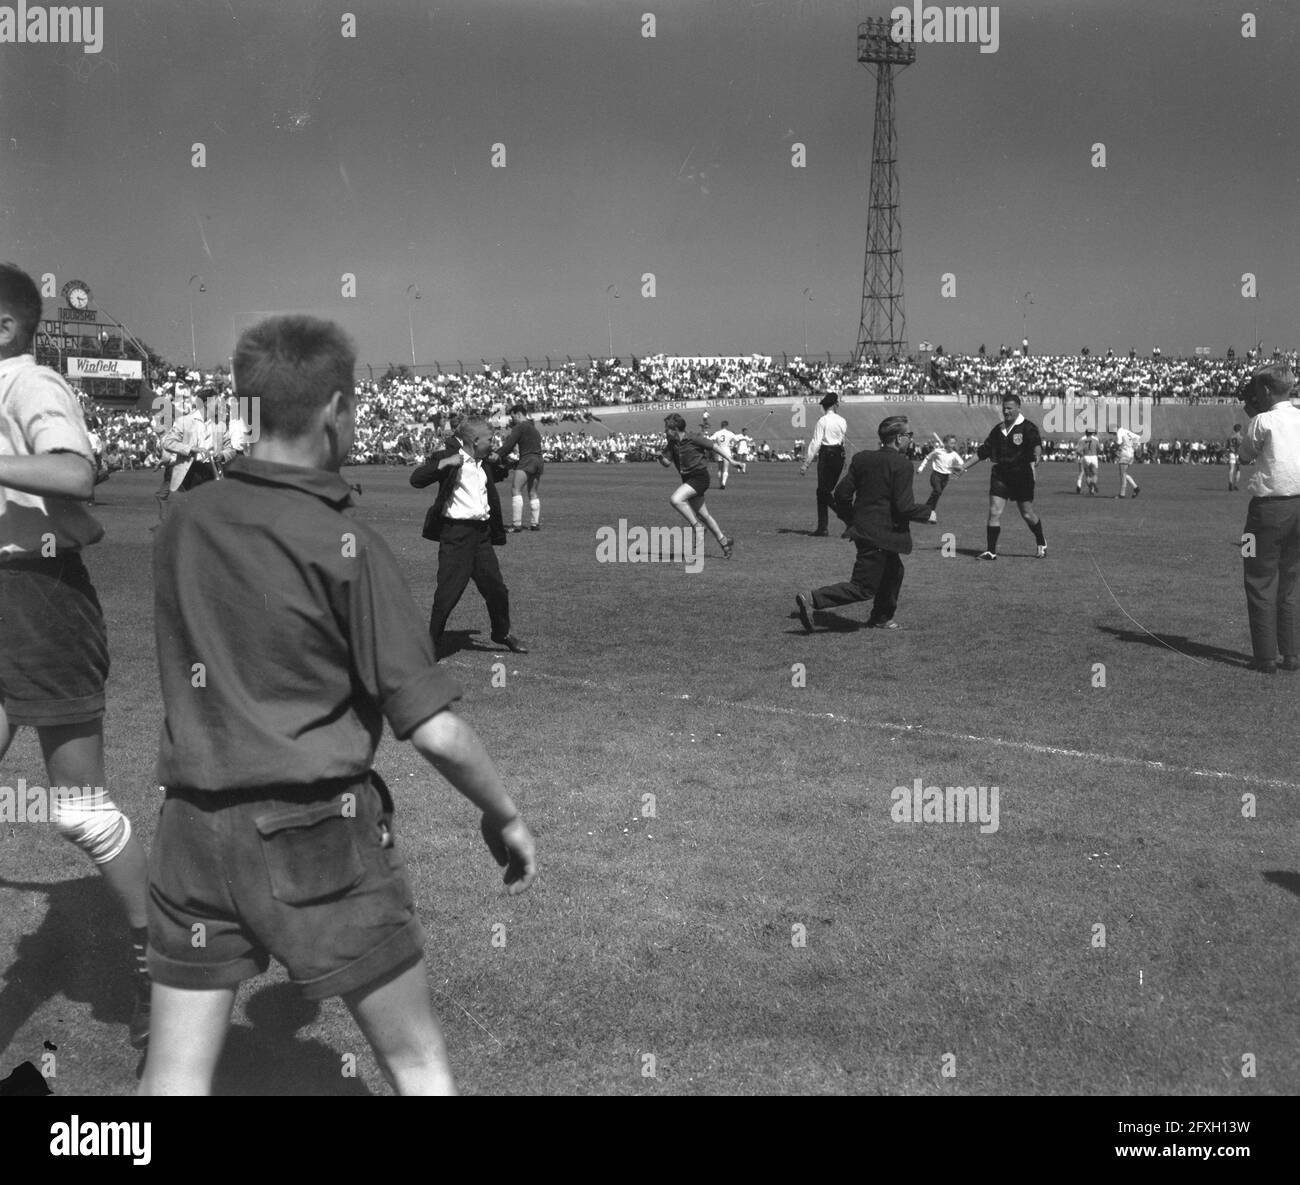 Soccer match DHC against Volewijckers. Supporters are chased off the field, June 25, 1961, SUPPORTERS, sports, soccer matches, The Netherlands, 20th century press agency photo, news to remember, documentary, historic photography 1945-1990, visual stories, human history of the Twentieth Century, capturing moments in time Stock Photo